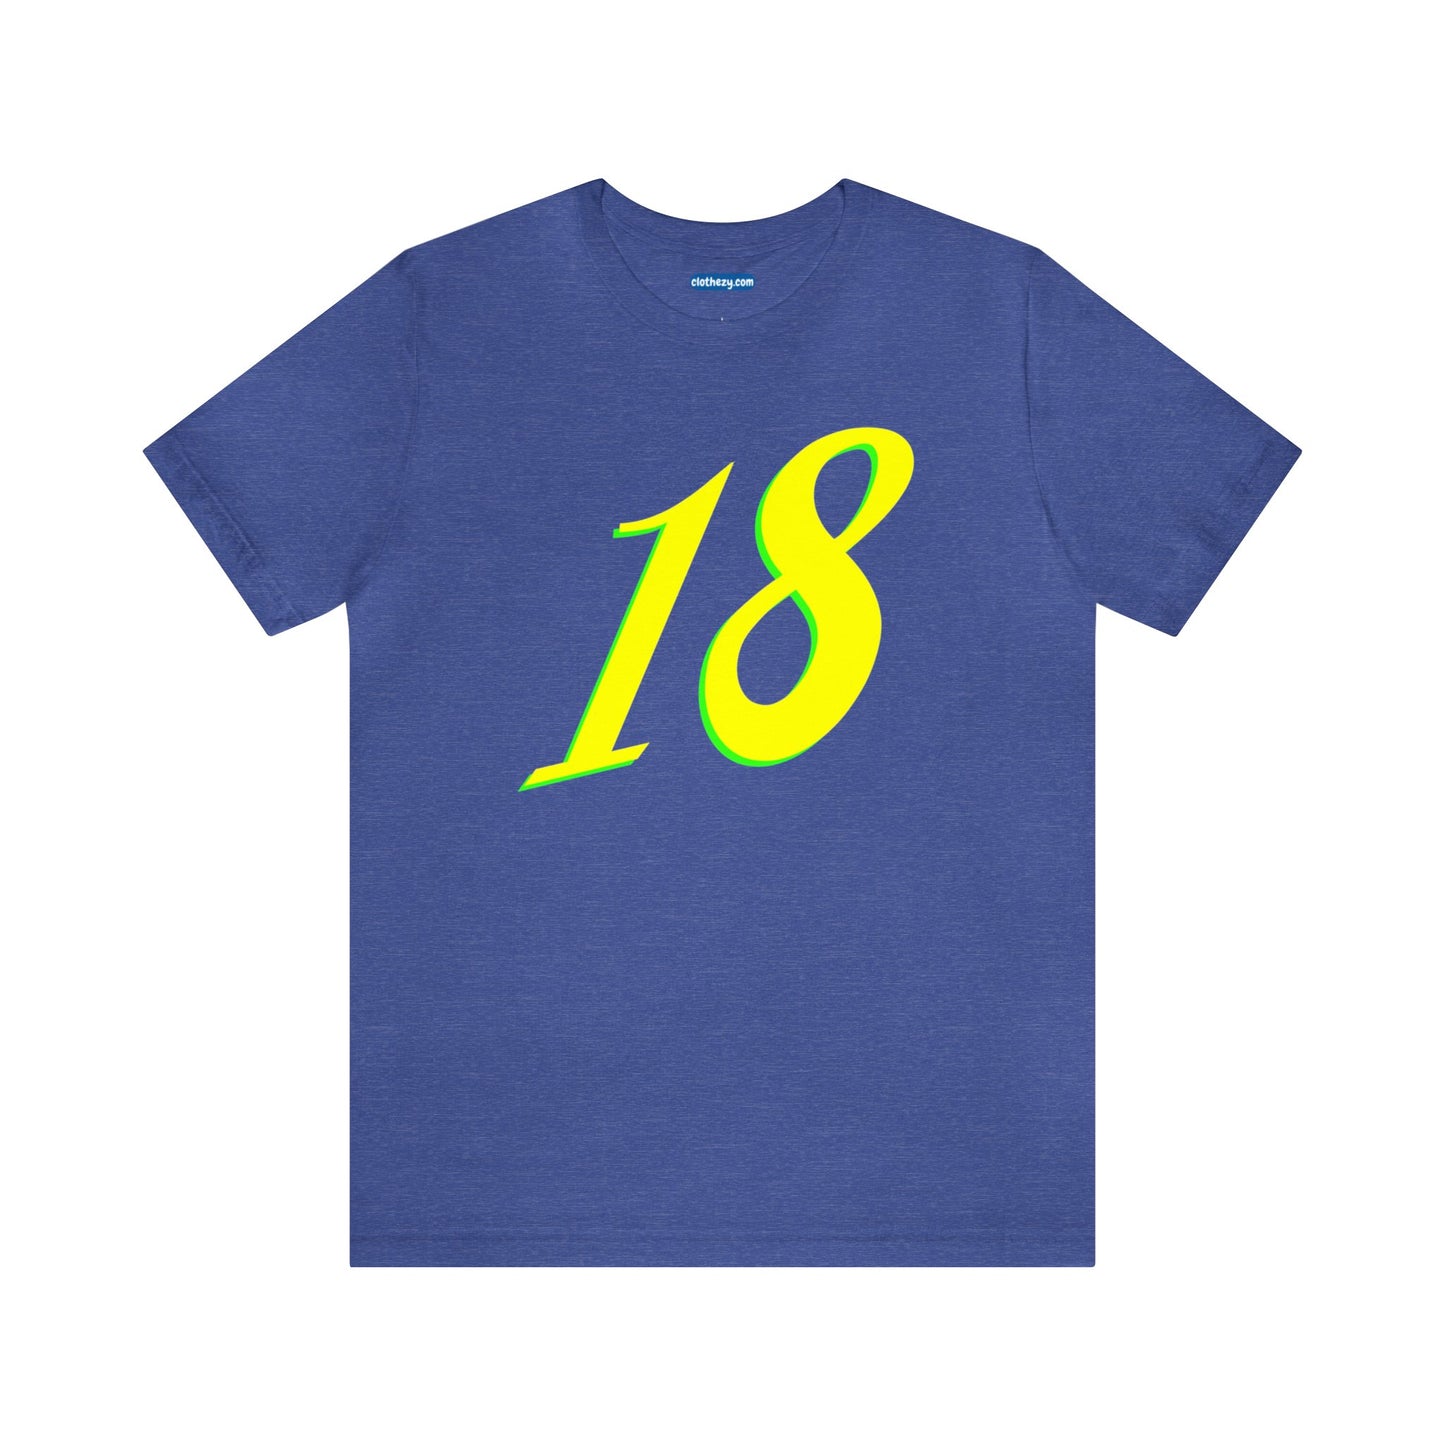 Number 18 Design - Soft Cotton Tee for birthdays and celebrations, Gift for friends and family, Multiple Options by clothezy.com in Royal Blue Heather Size Small - Buy Now